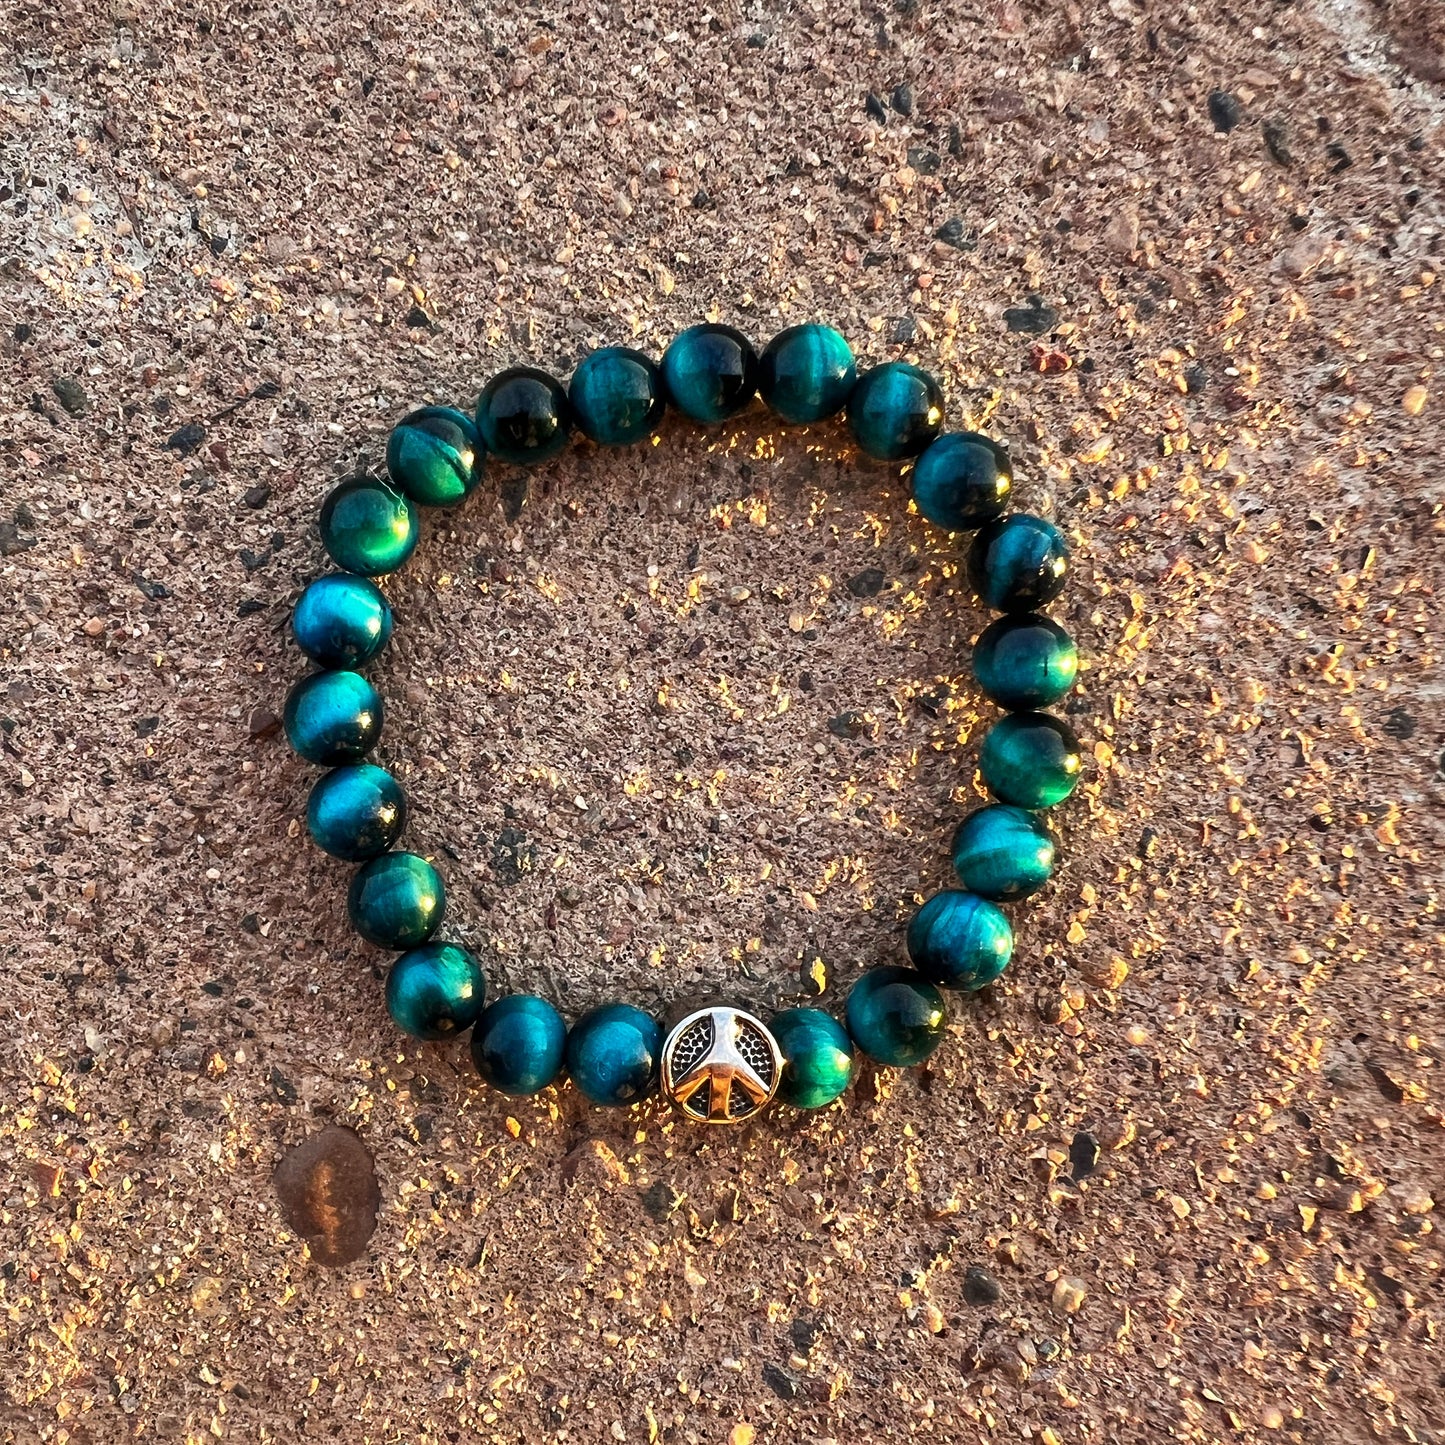 Blue Tigers Eye with peace sign…